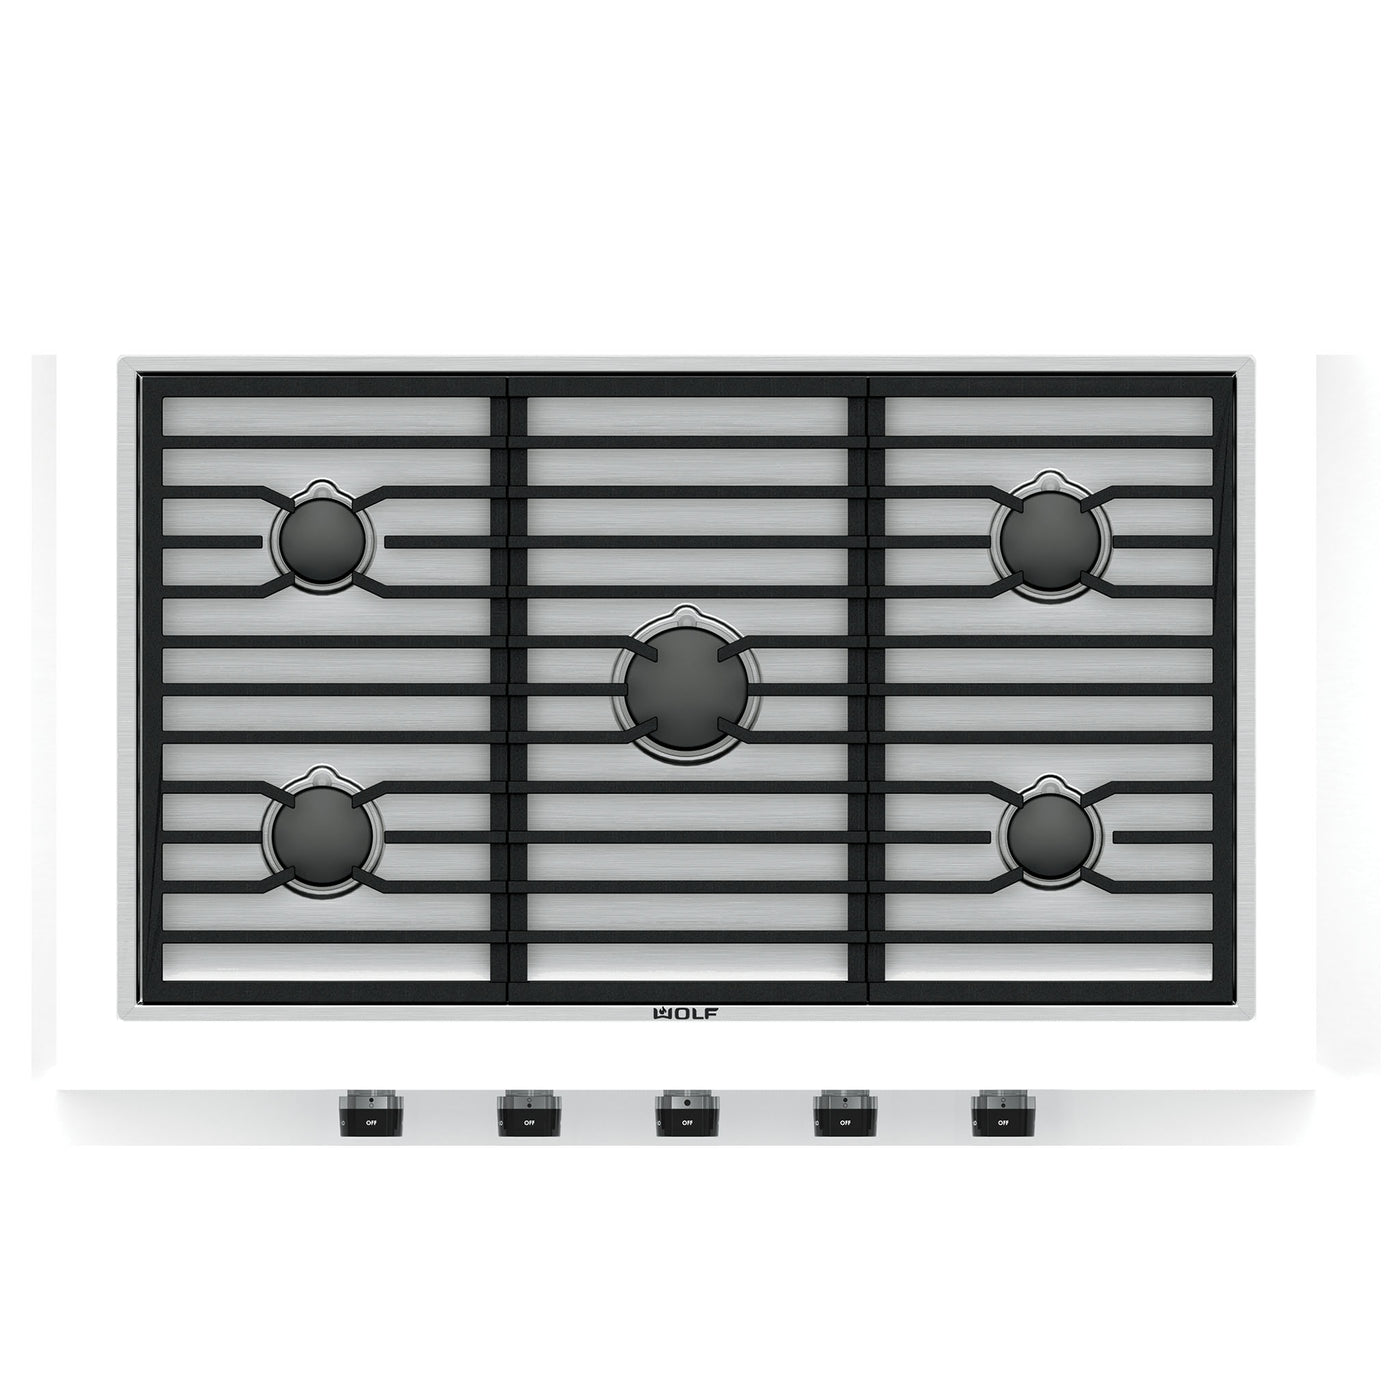 36" Contemporary Gas Cooktop - 5 Burners